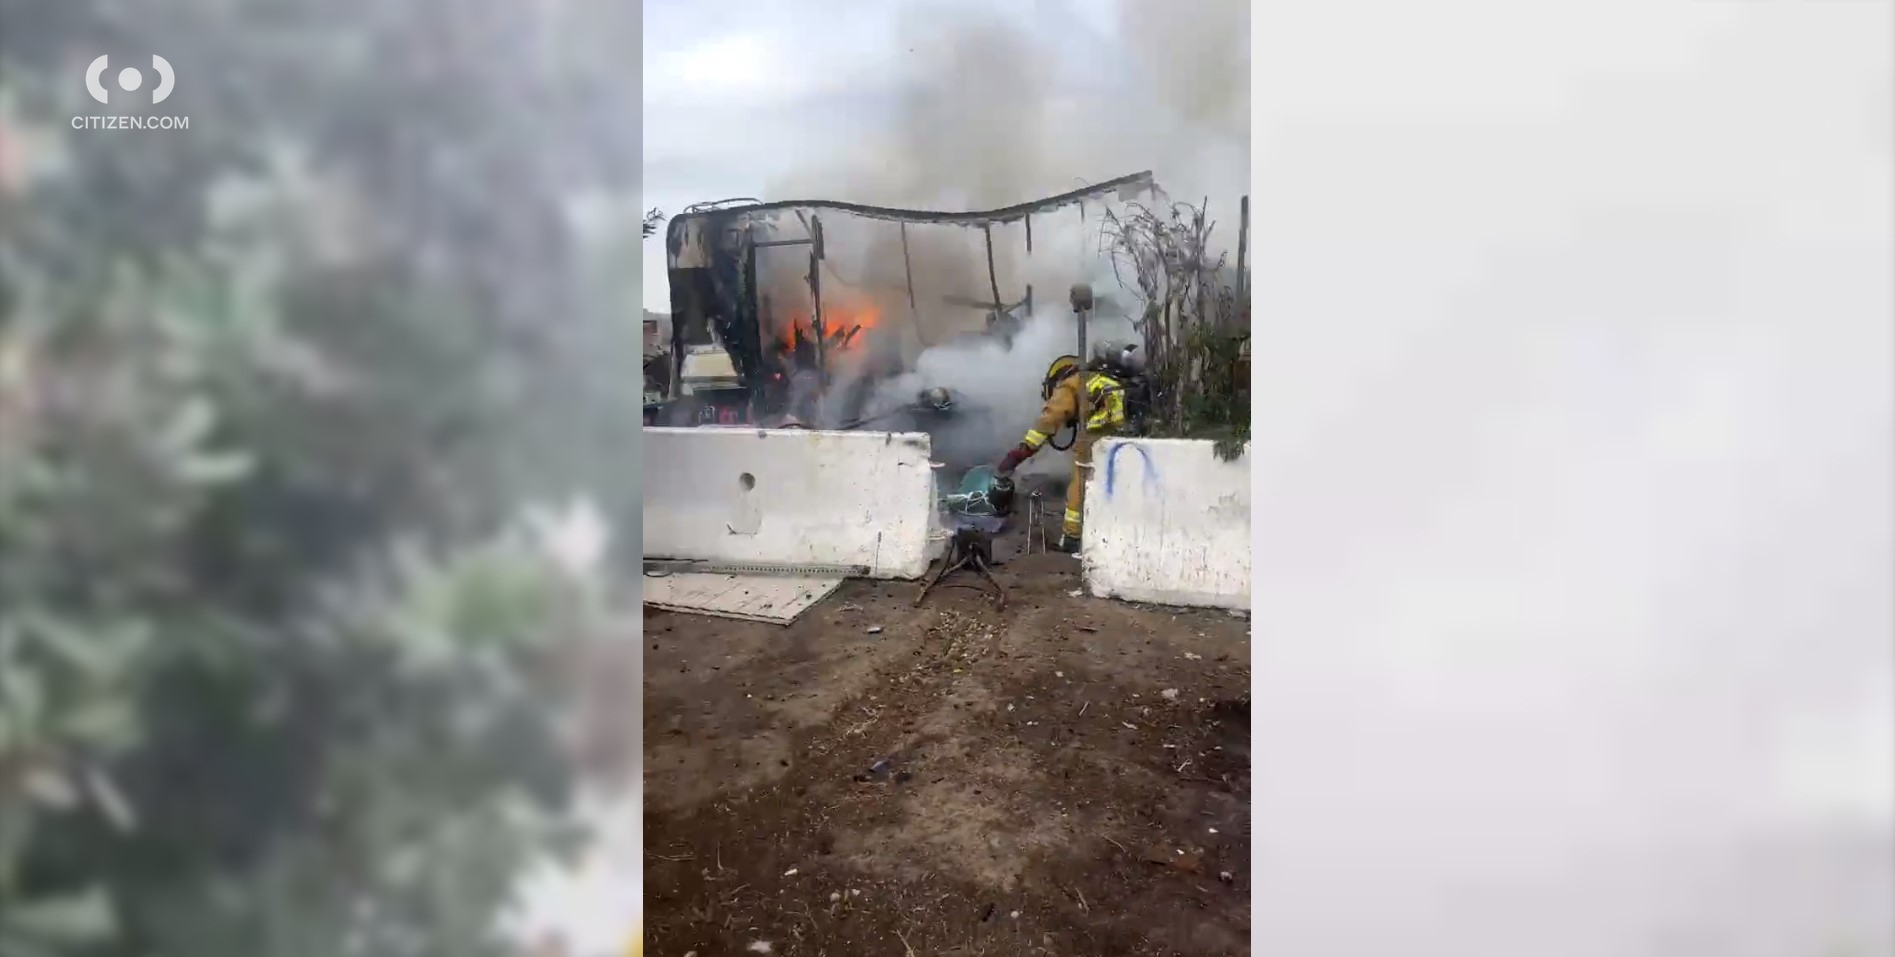 A man was declared dead after an RV fire in Playa del Rey on Feb. 18, 2023, as shown on the Citizen app.